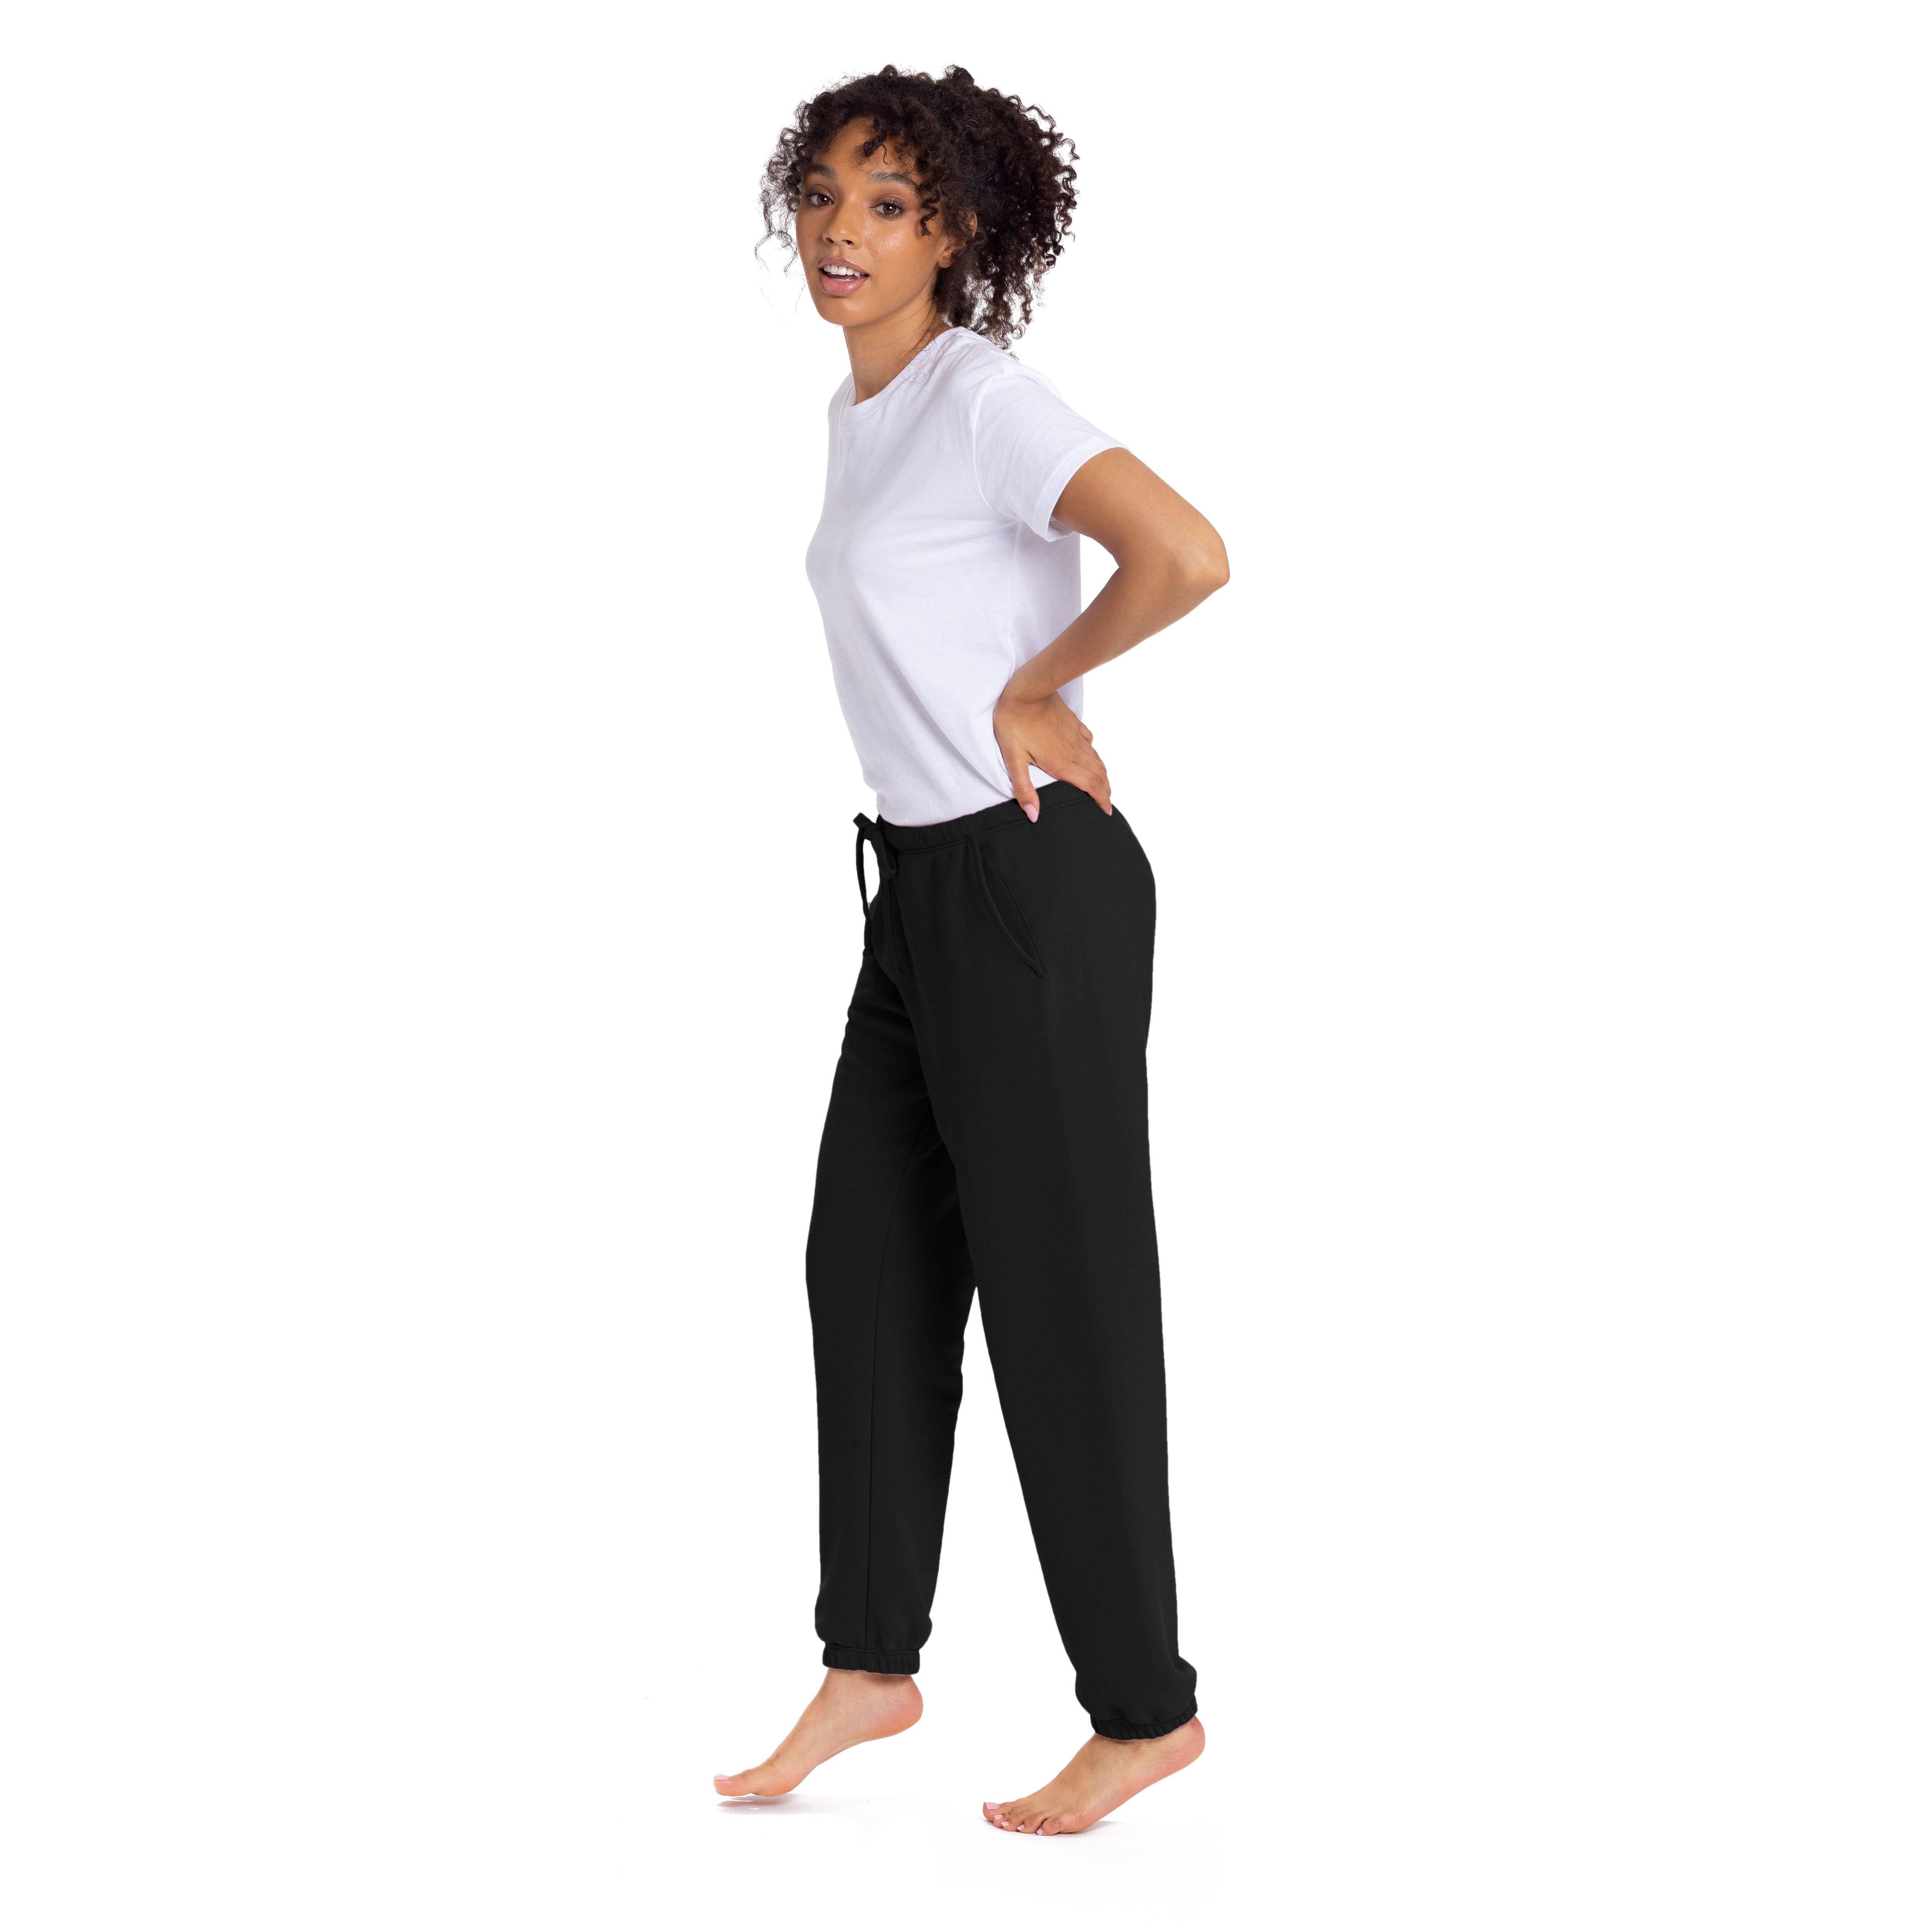 Women's sueded French Terry sweatpants